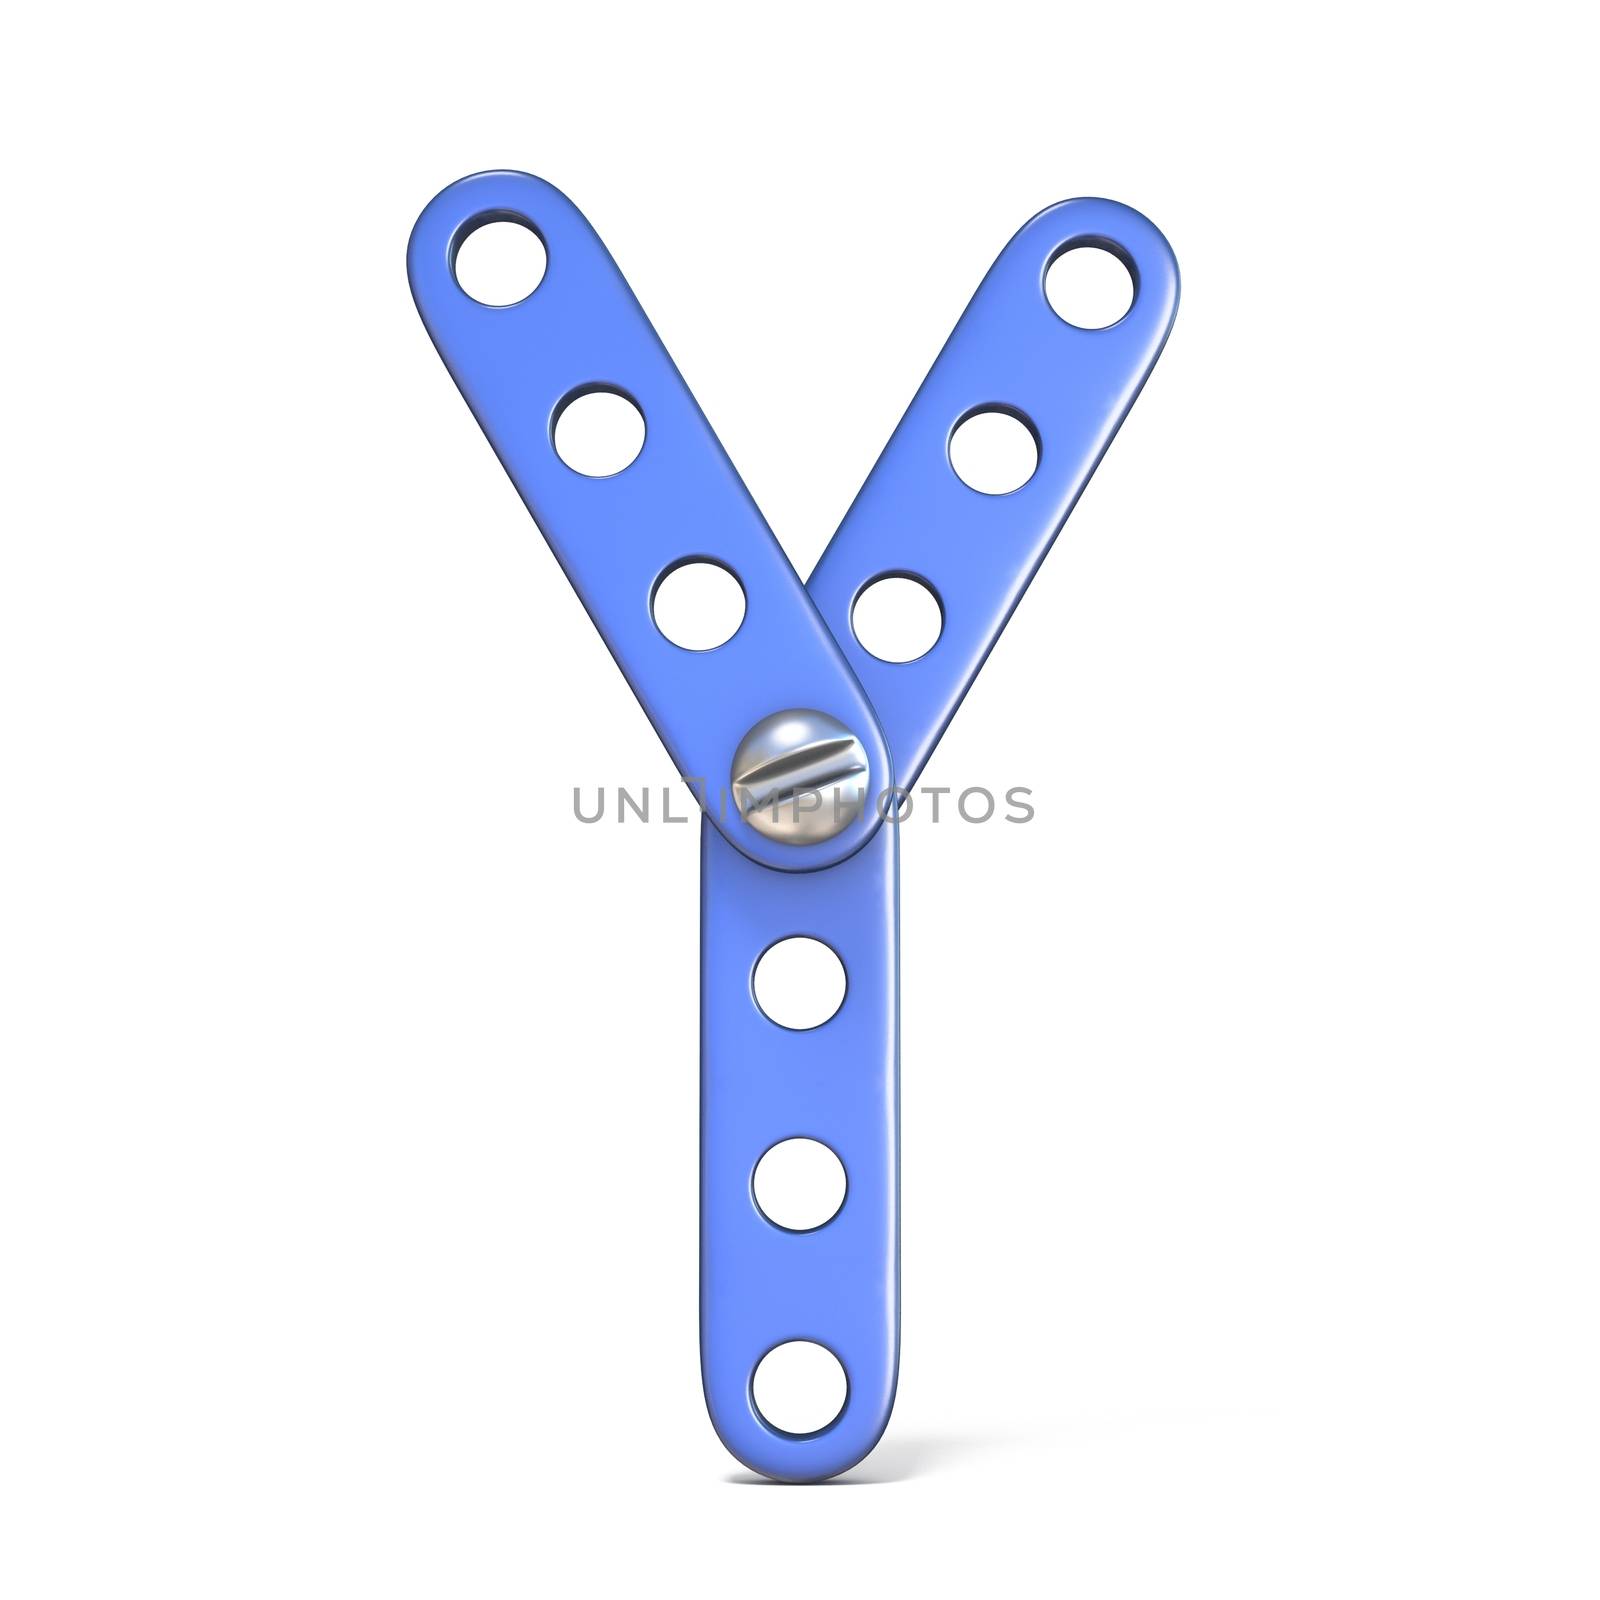 Alphabet made of blue metal constructor toy Letter Y 3D by djmilic